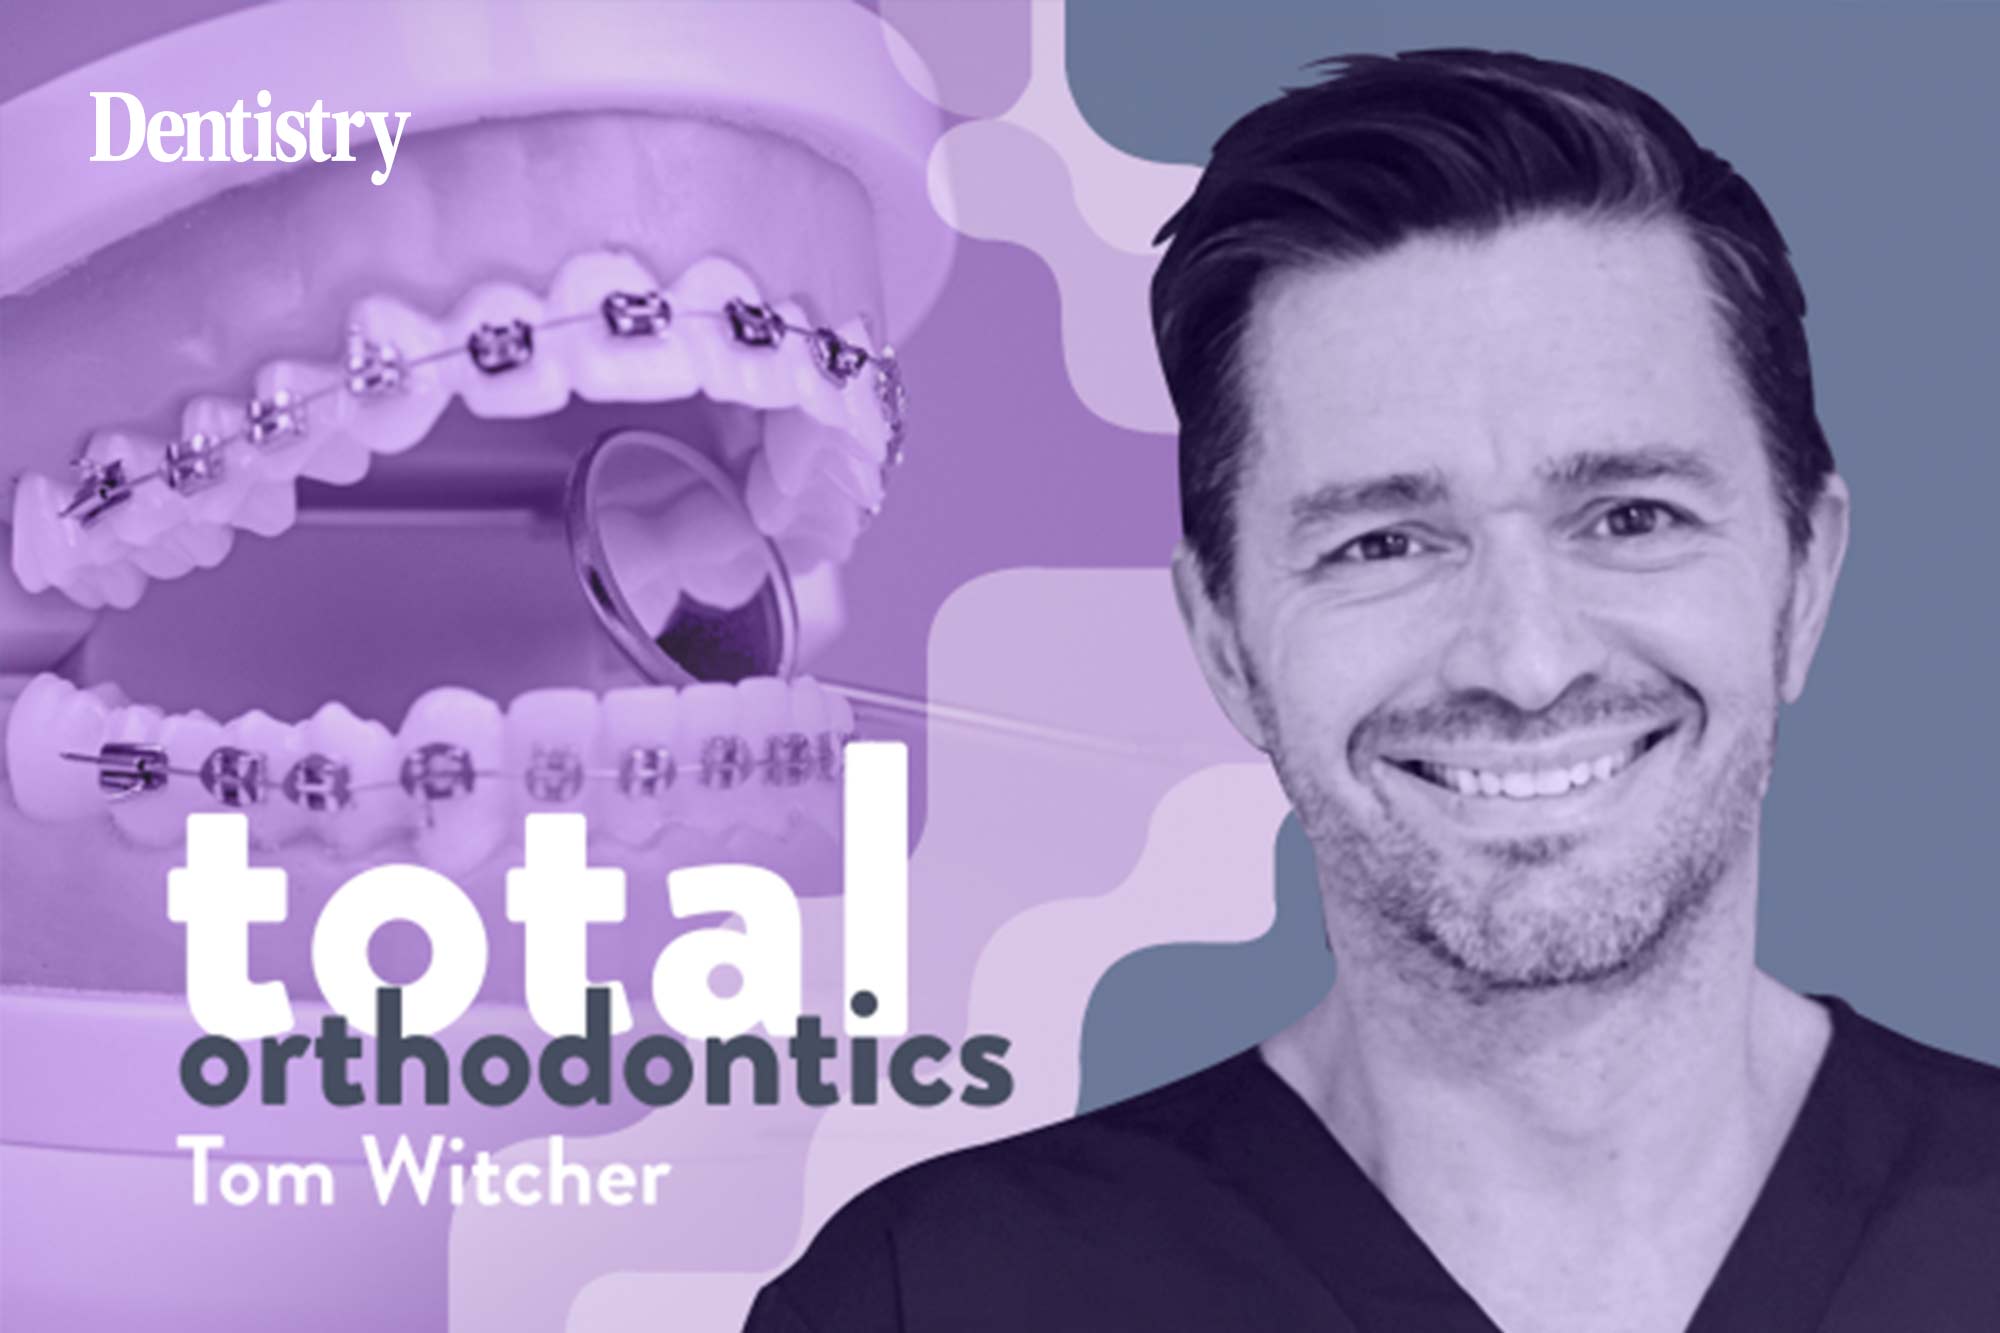 Tom Witcher, a specialist orthodontist at Total Orthodontics Lewes, part of Bupa Dental Care, shares his method for deciding whether to extract poor prognosis first molars in mixed dentition.